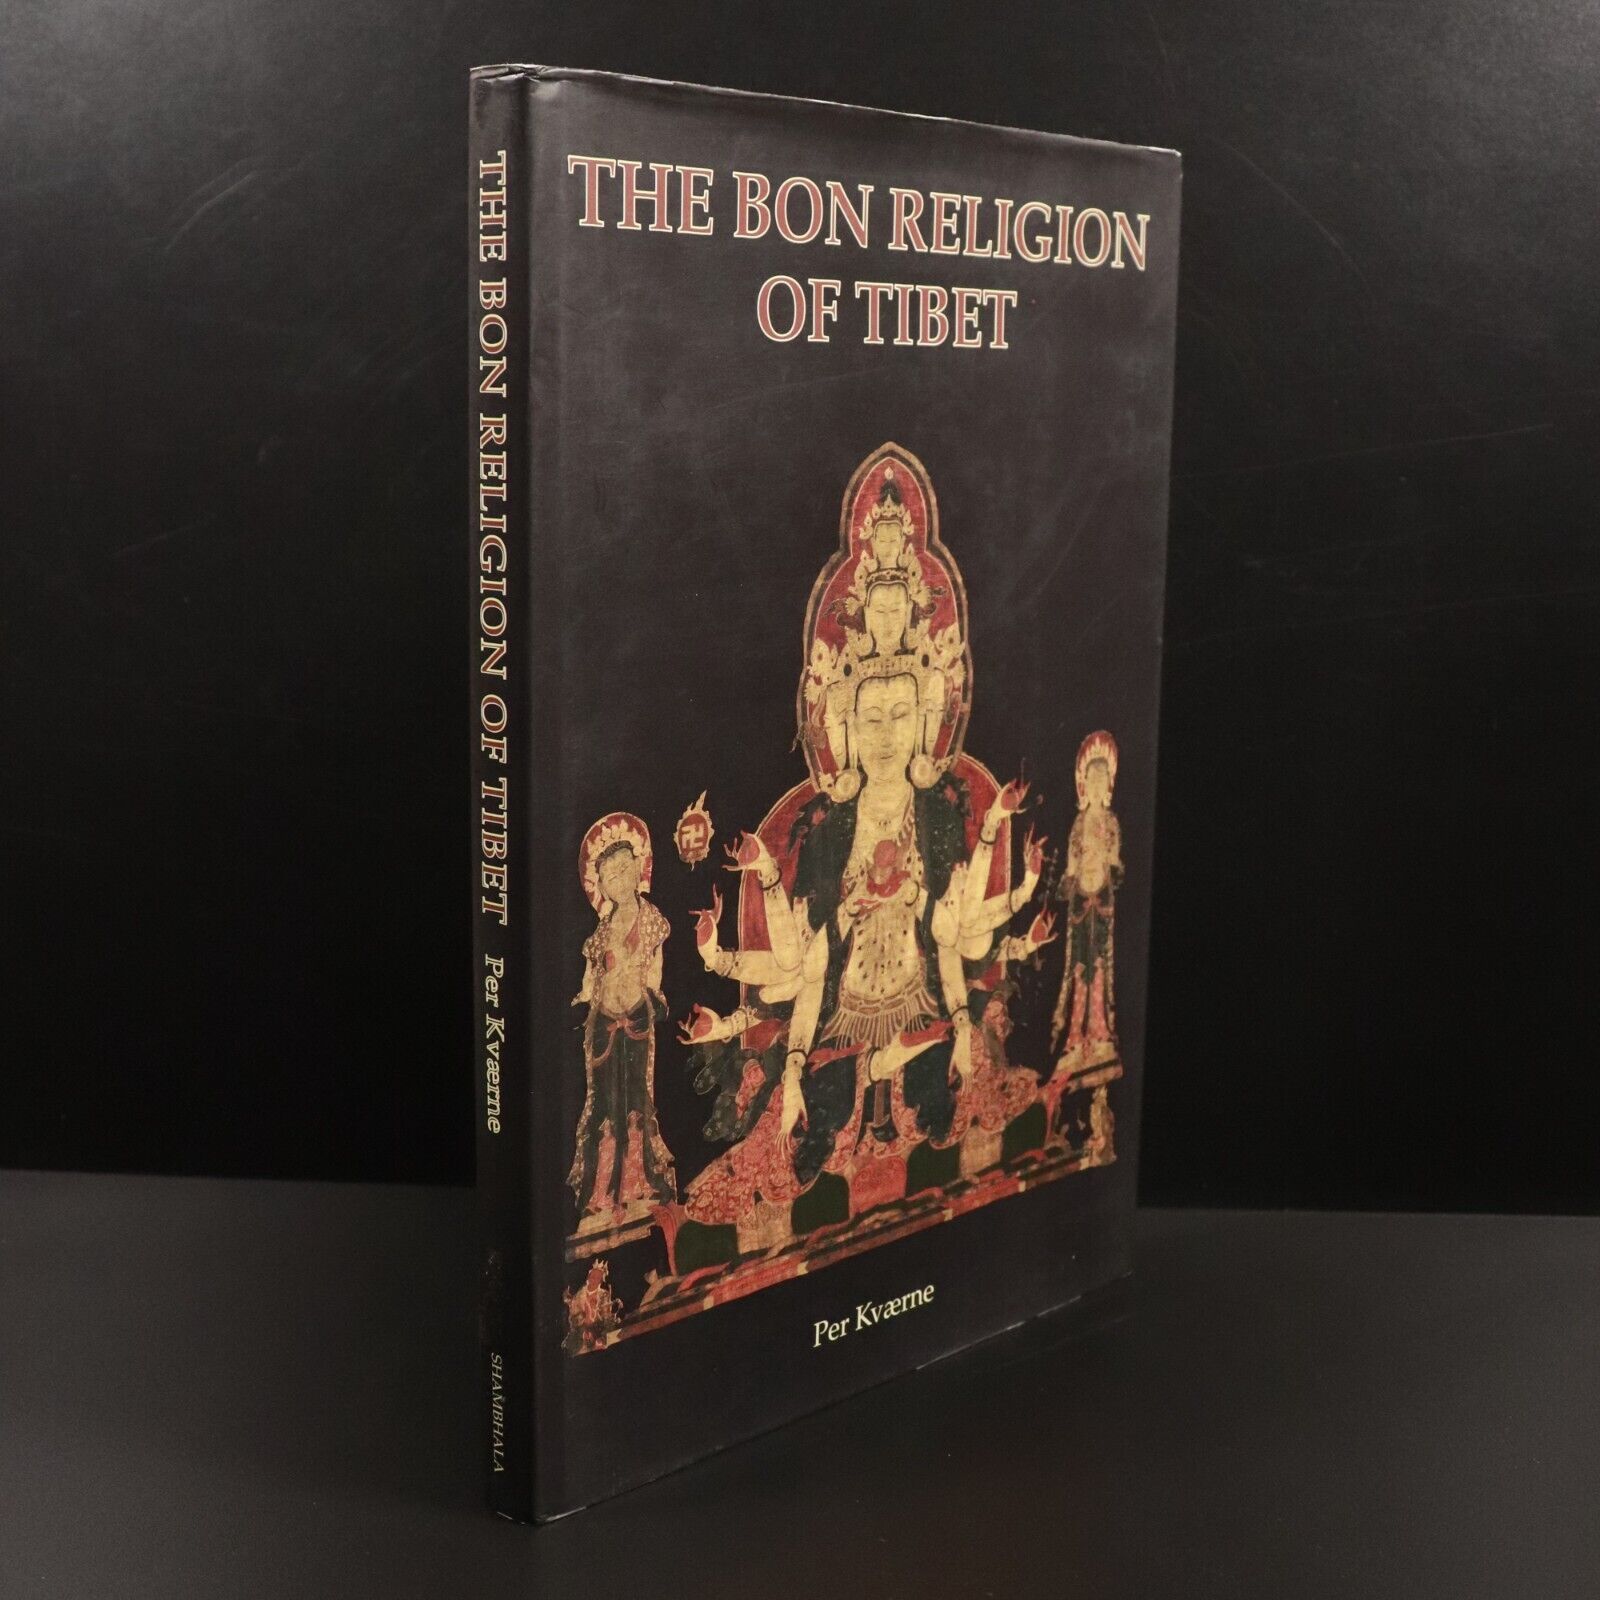 1996 The Bon Religion Of Tibet by Per Kvaerne Religious History Book China